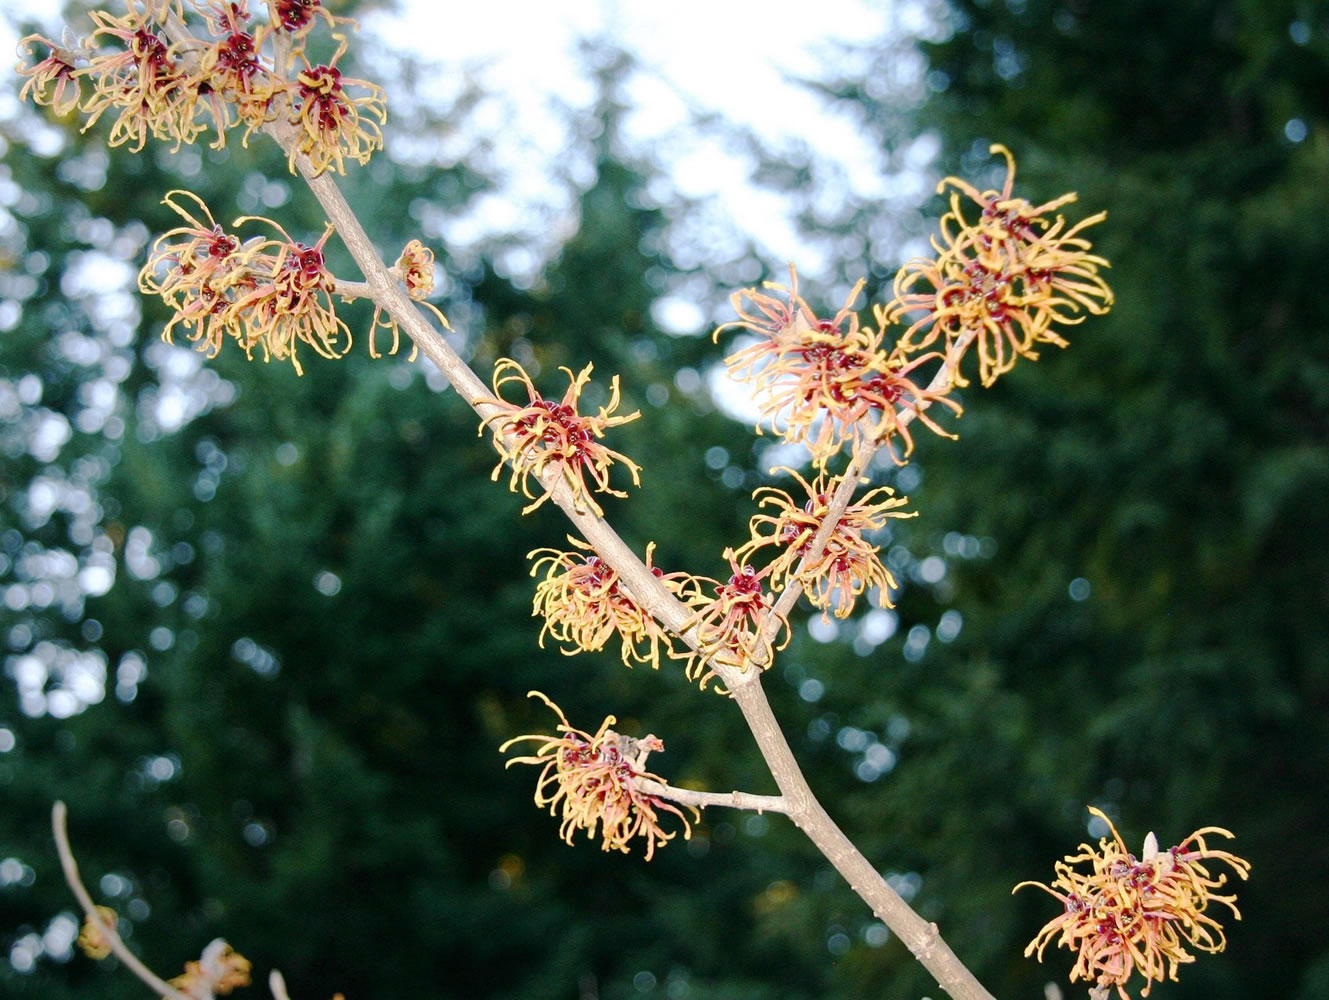 While most other plants are sleeping, Witch Hazel comes alive with bright, fragrant winter blooms.